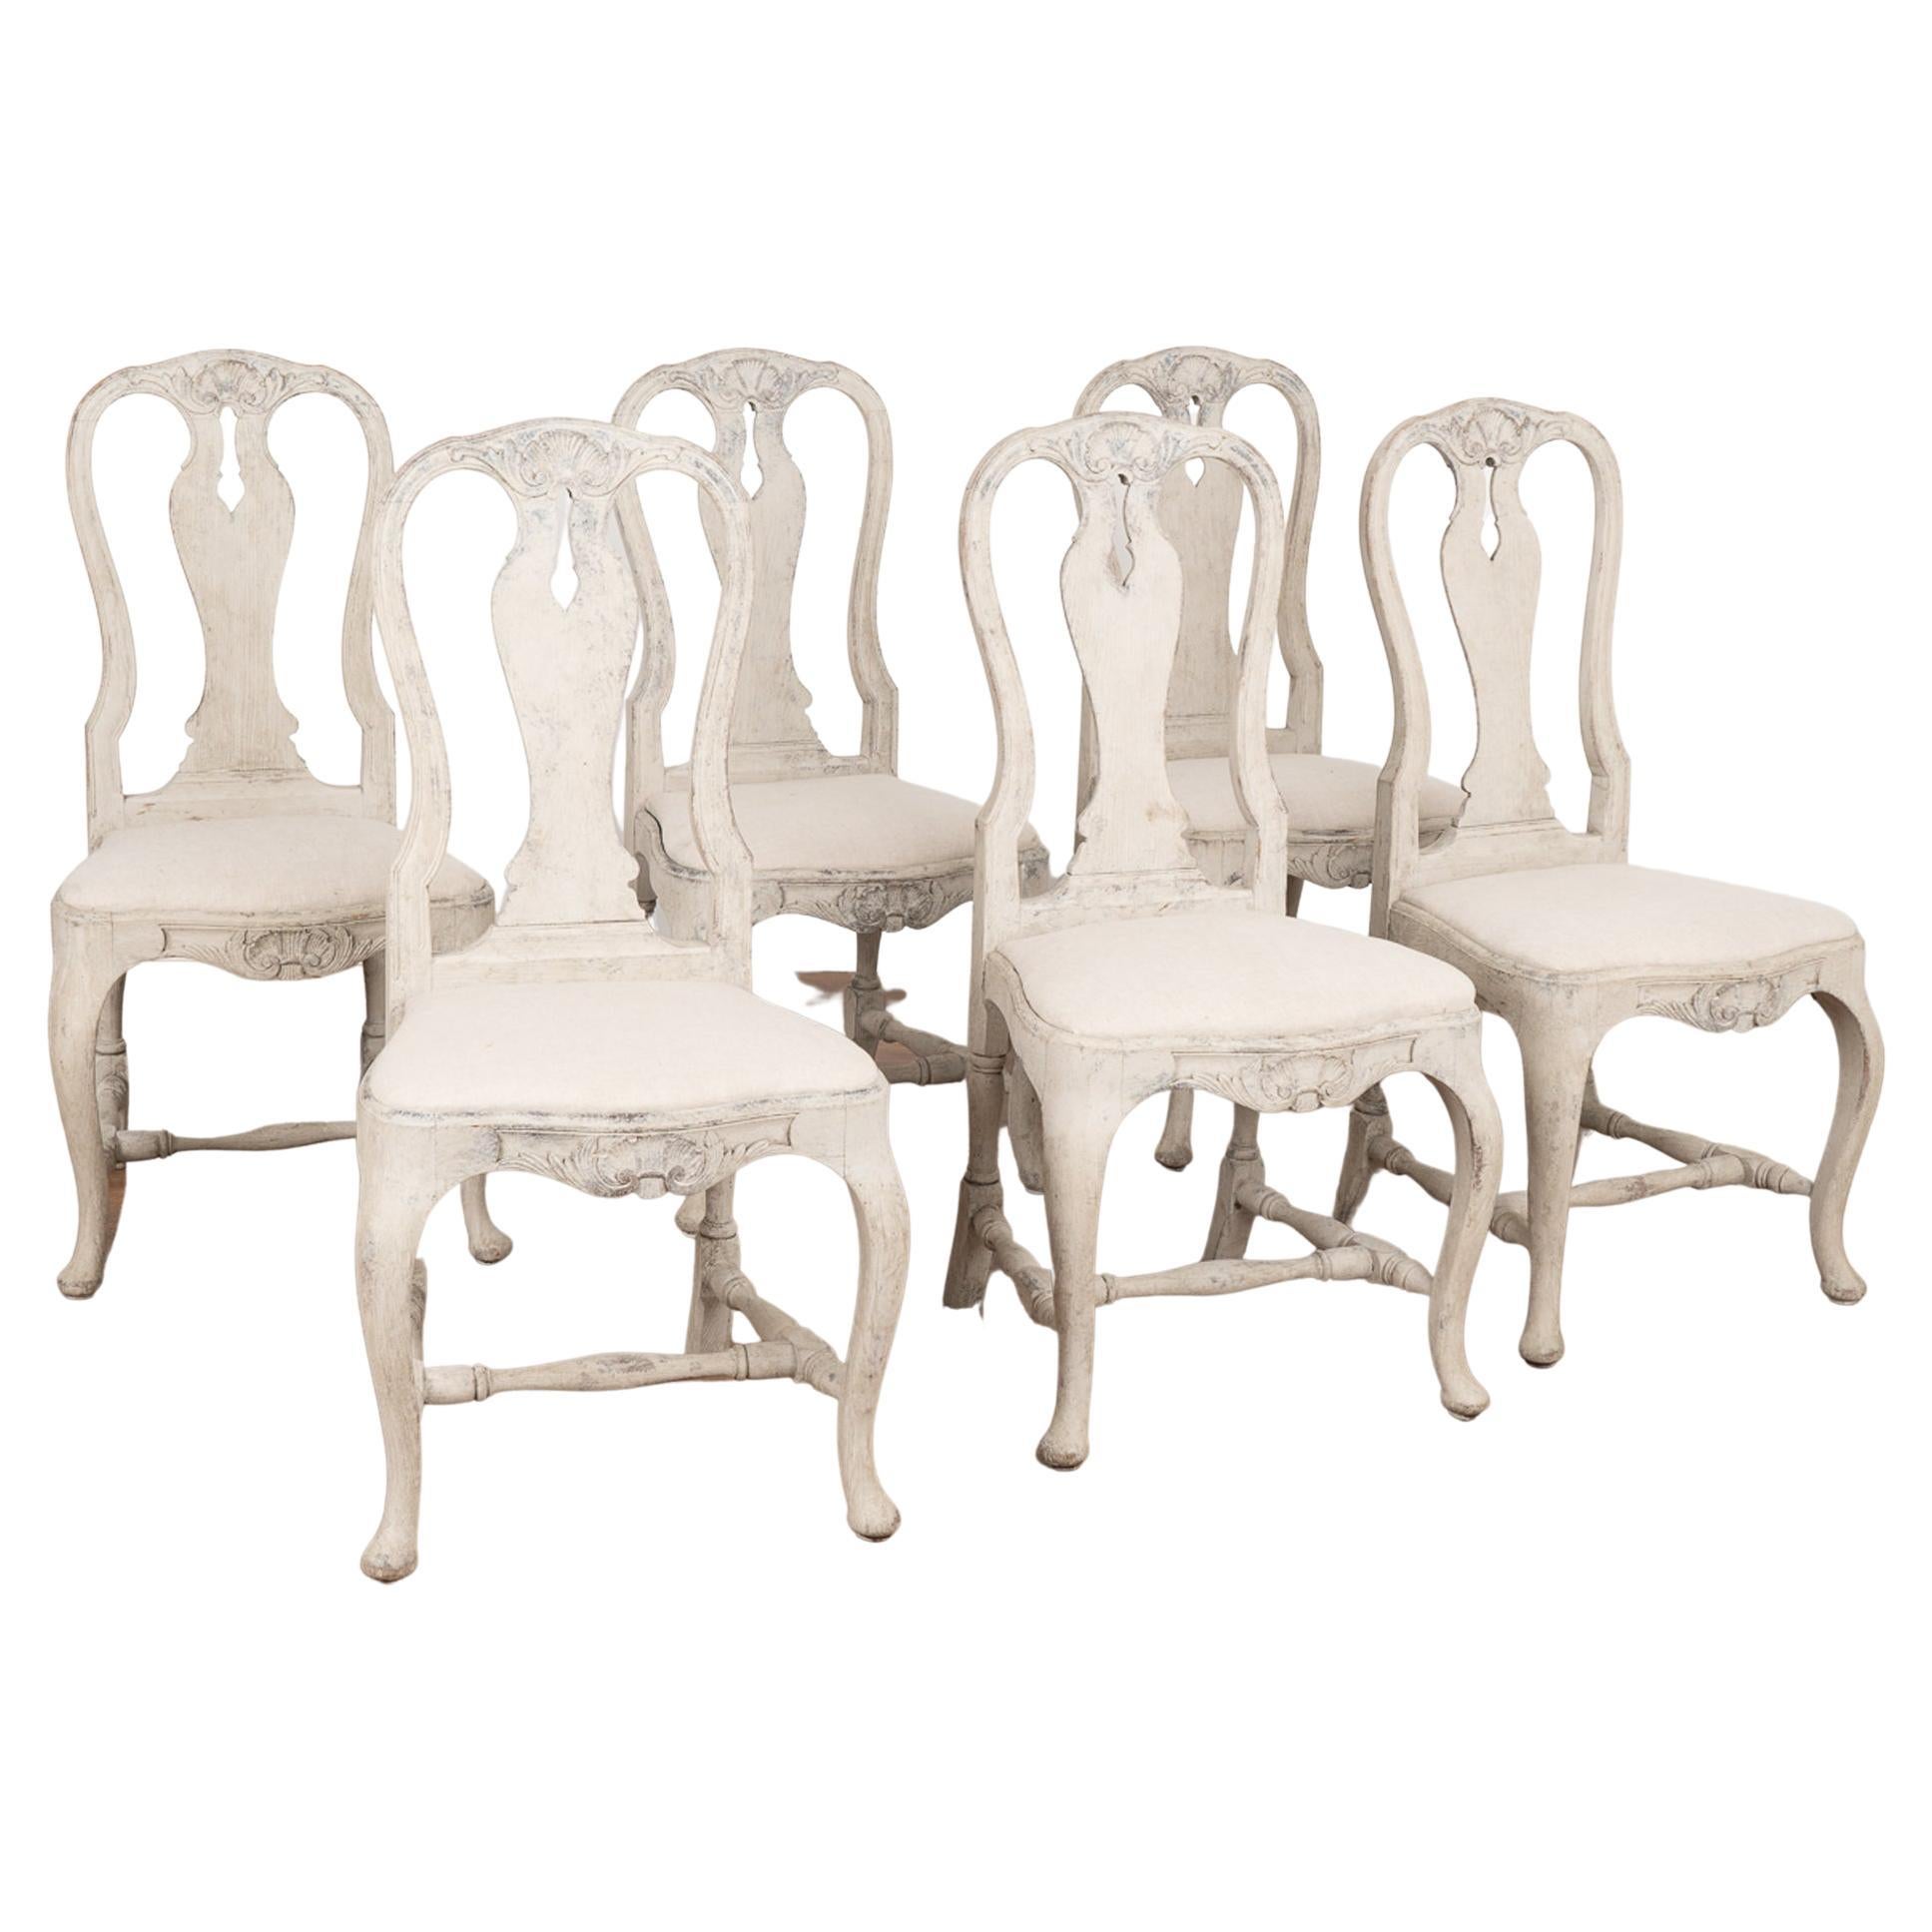 Set of Six Rococo Gray Dining Chairs, Sweden circa 1840-60 For Sale